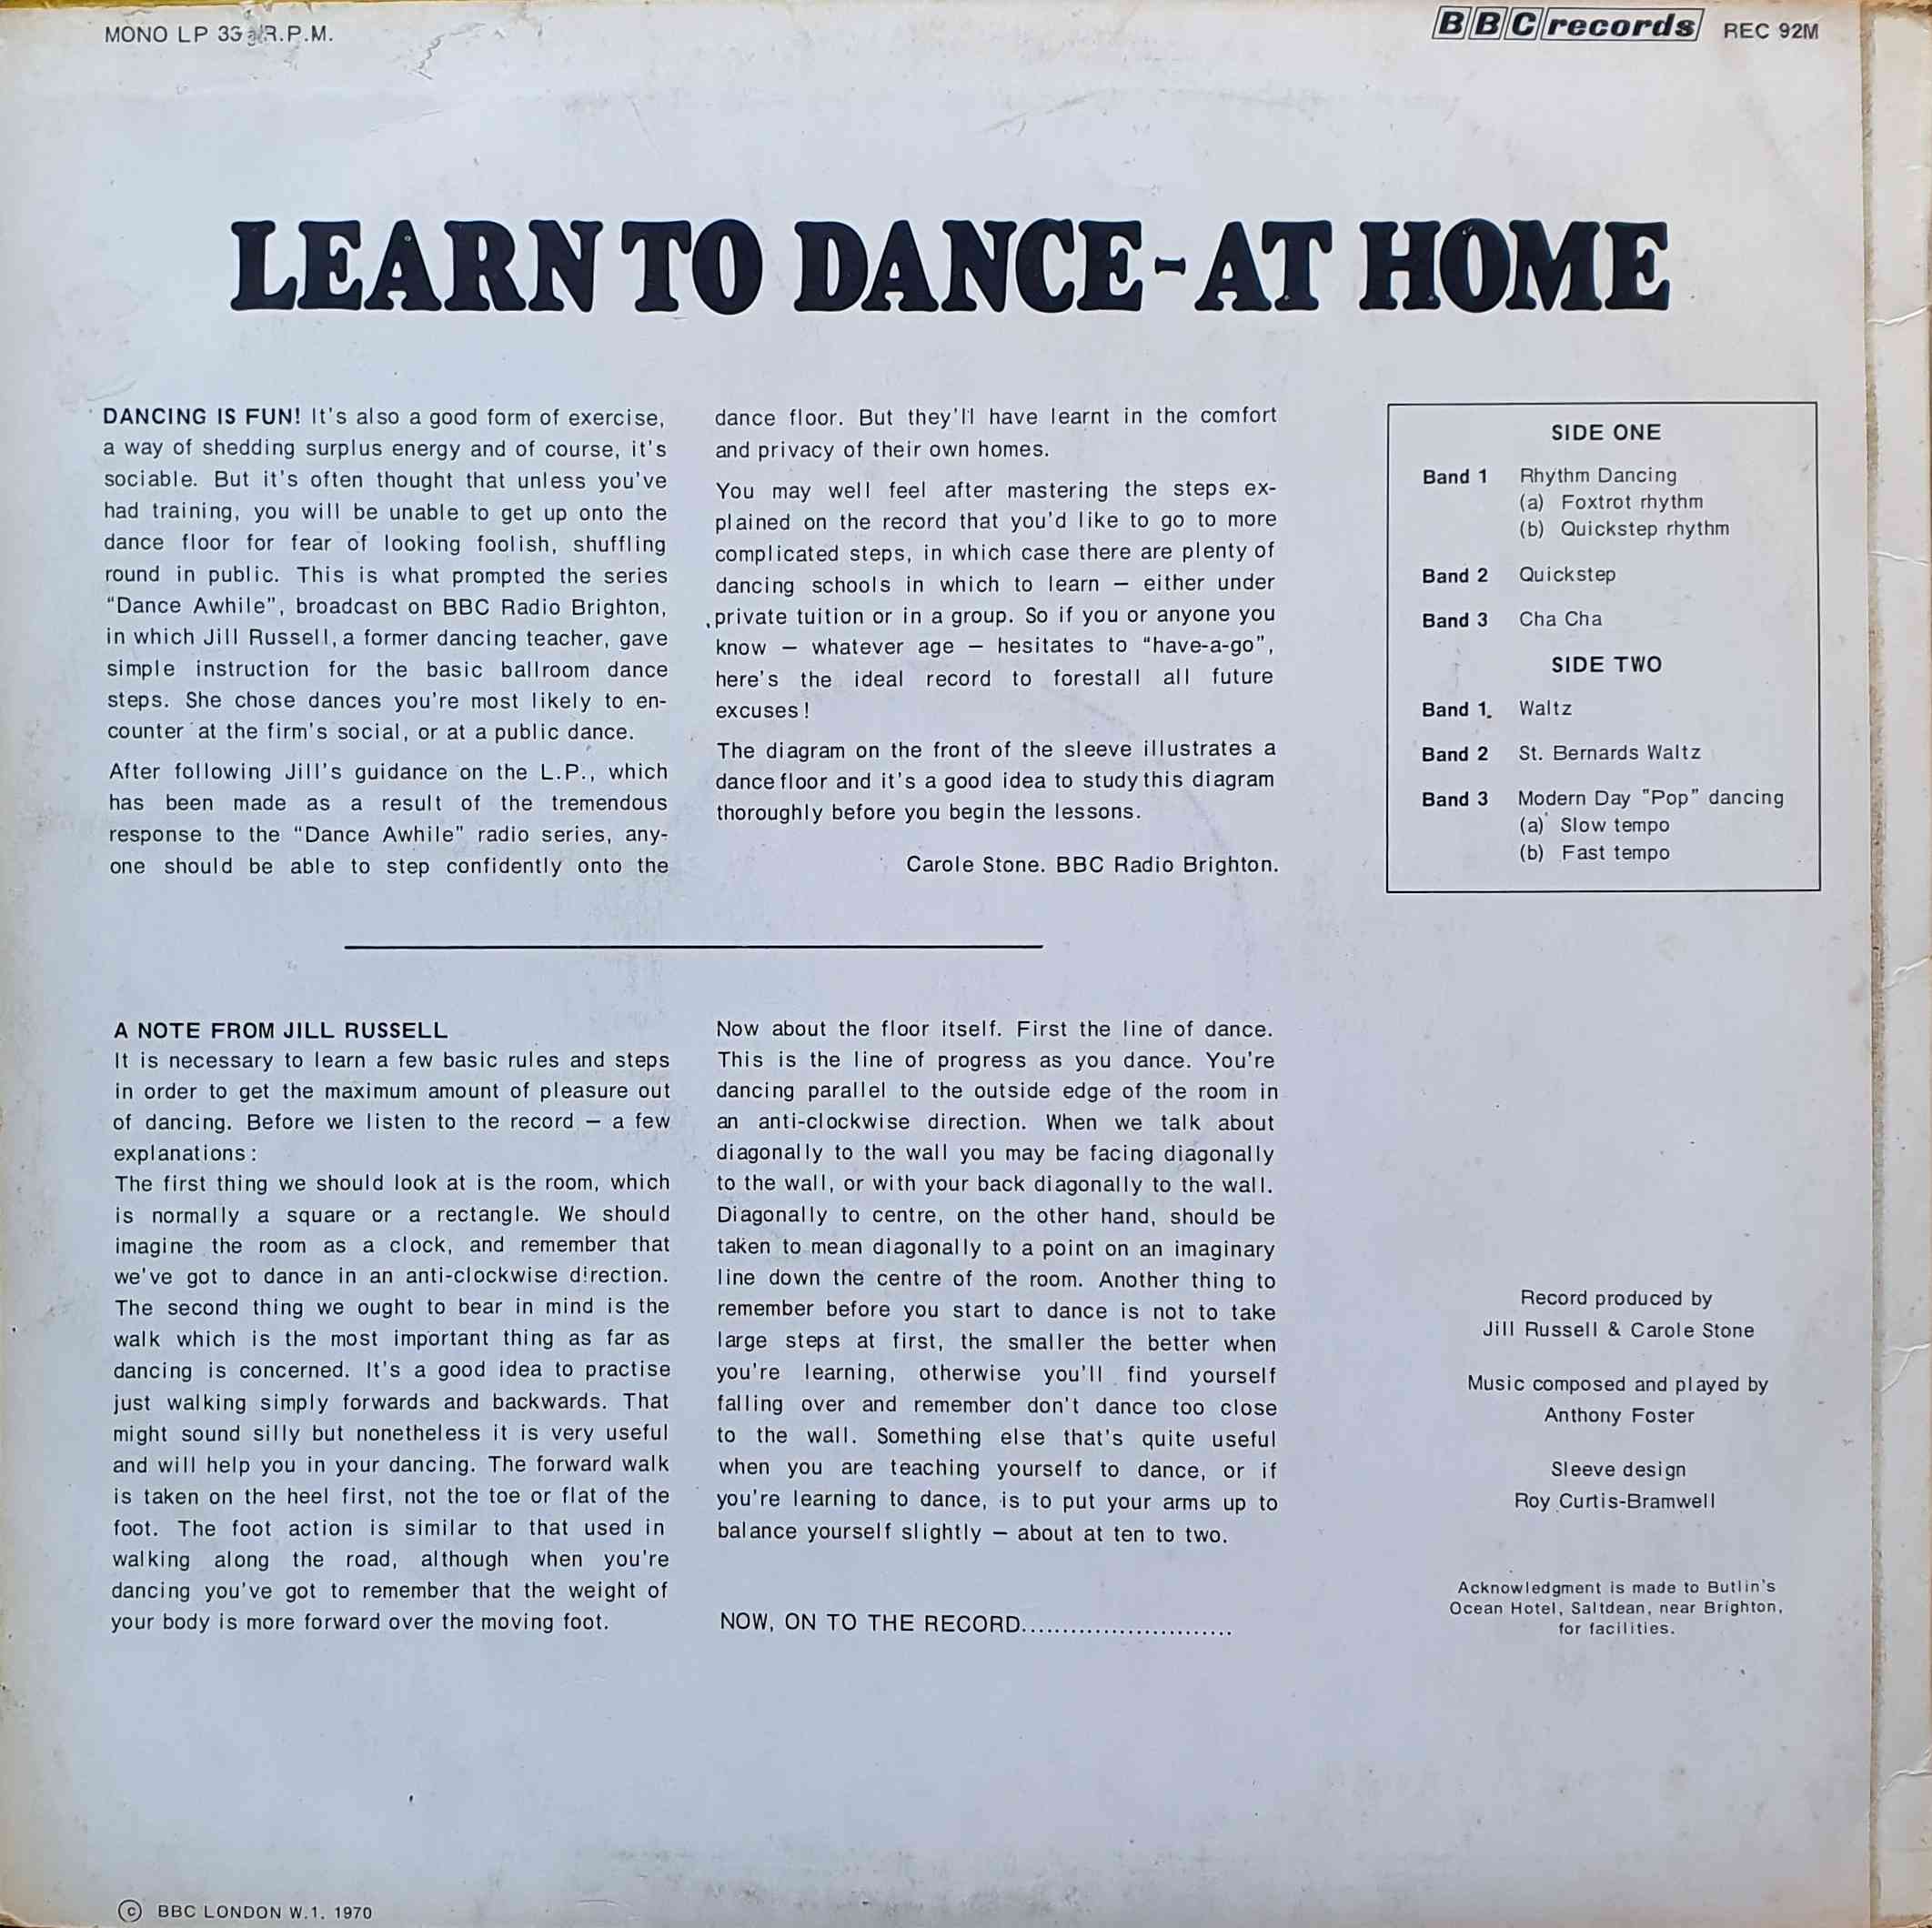 Picture of REC 92 Learn to dance at home by artist Anthony Foster from the BBC records and Tapes library